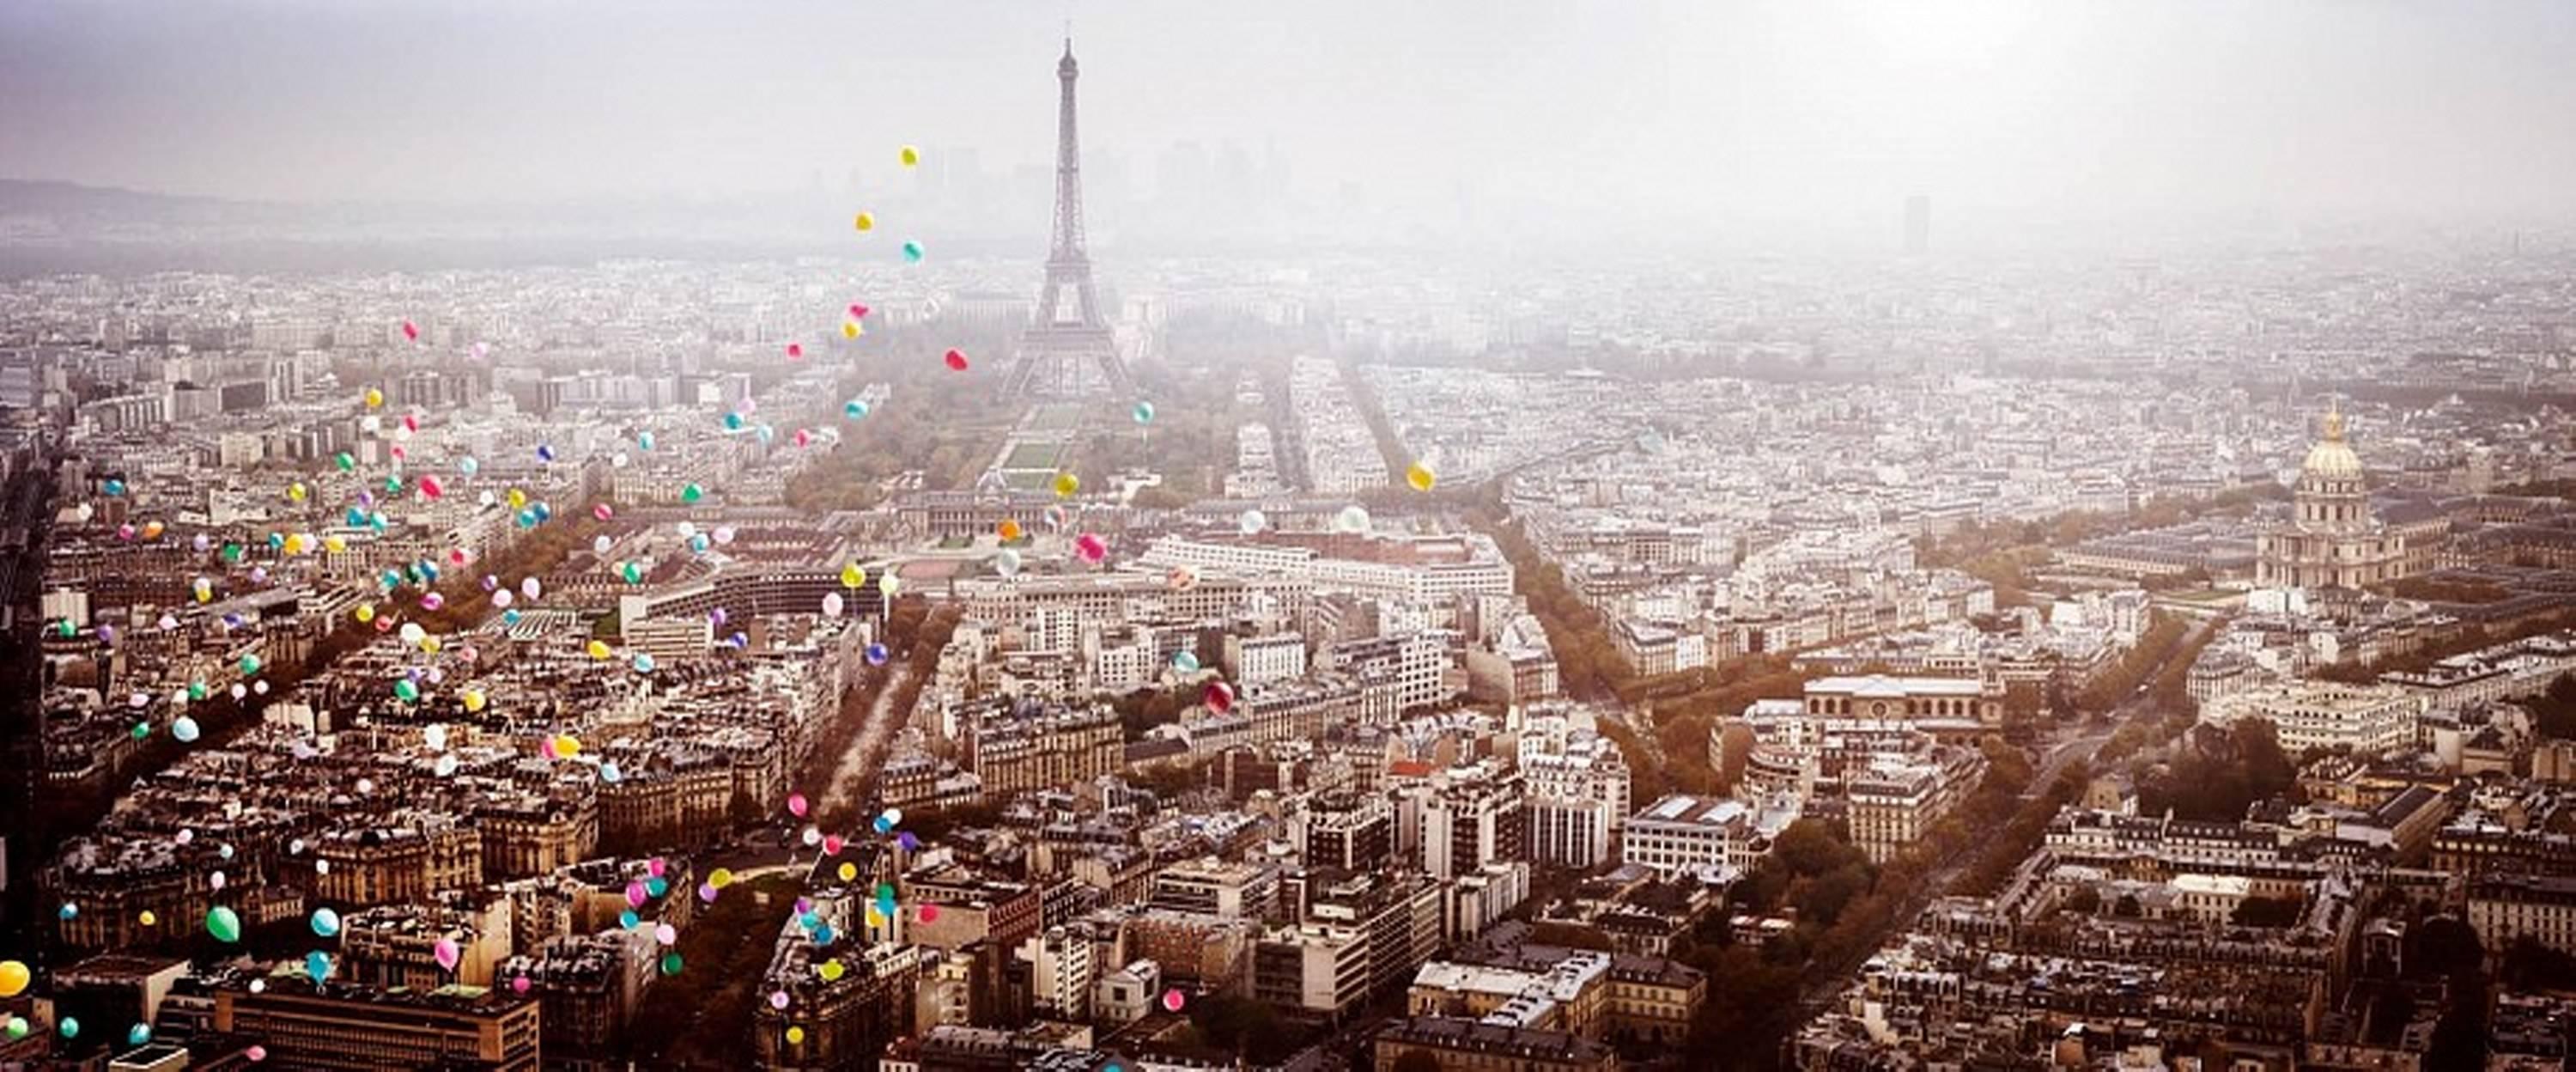 David Drebin Color Photograph - Balloons over Paris (France) - aerial view of Paris with Eiffel Tower balloons 